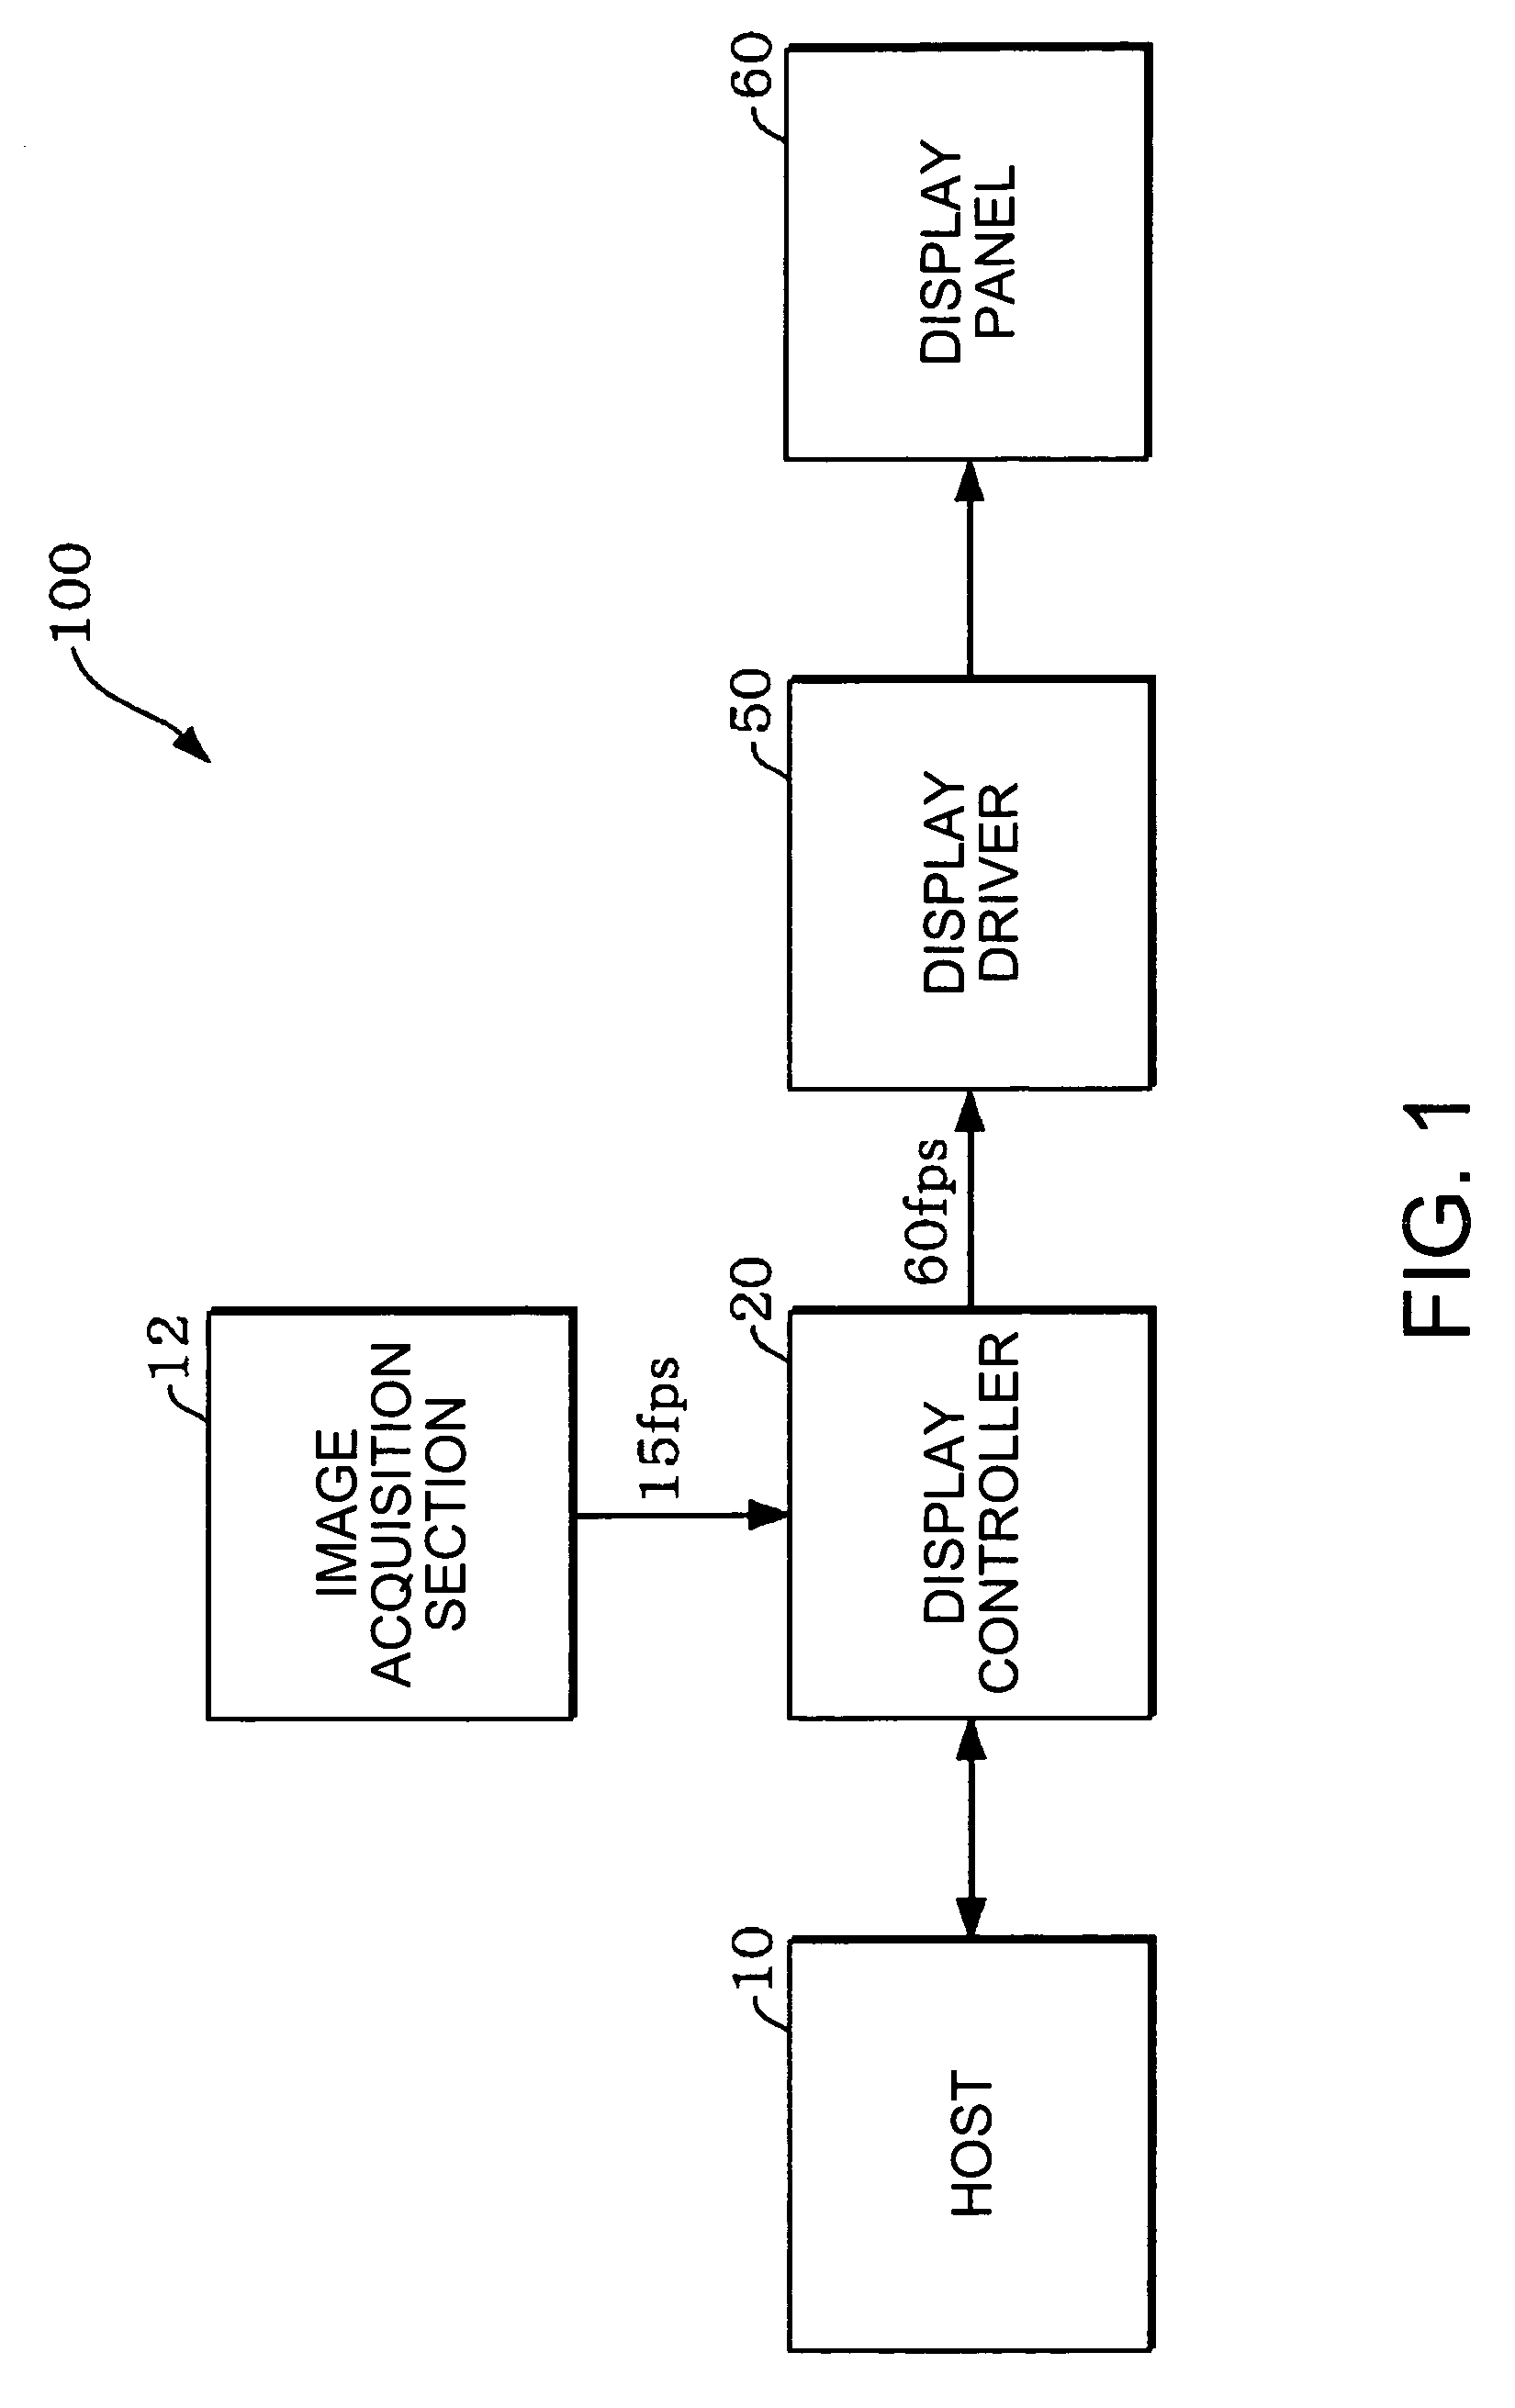 Display controller, electronic instrument, and method of supplying image data